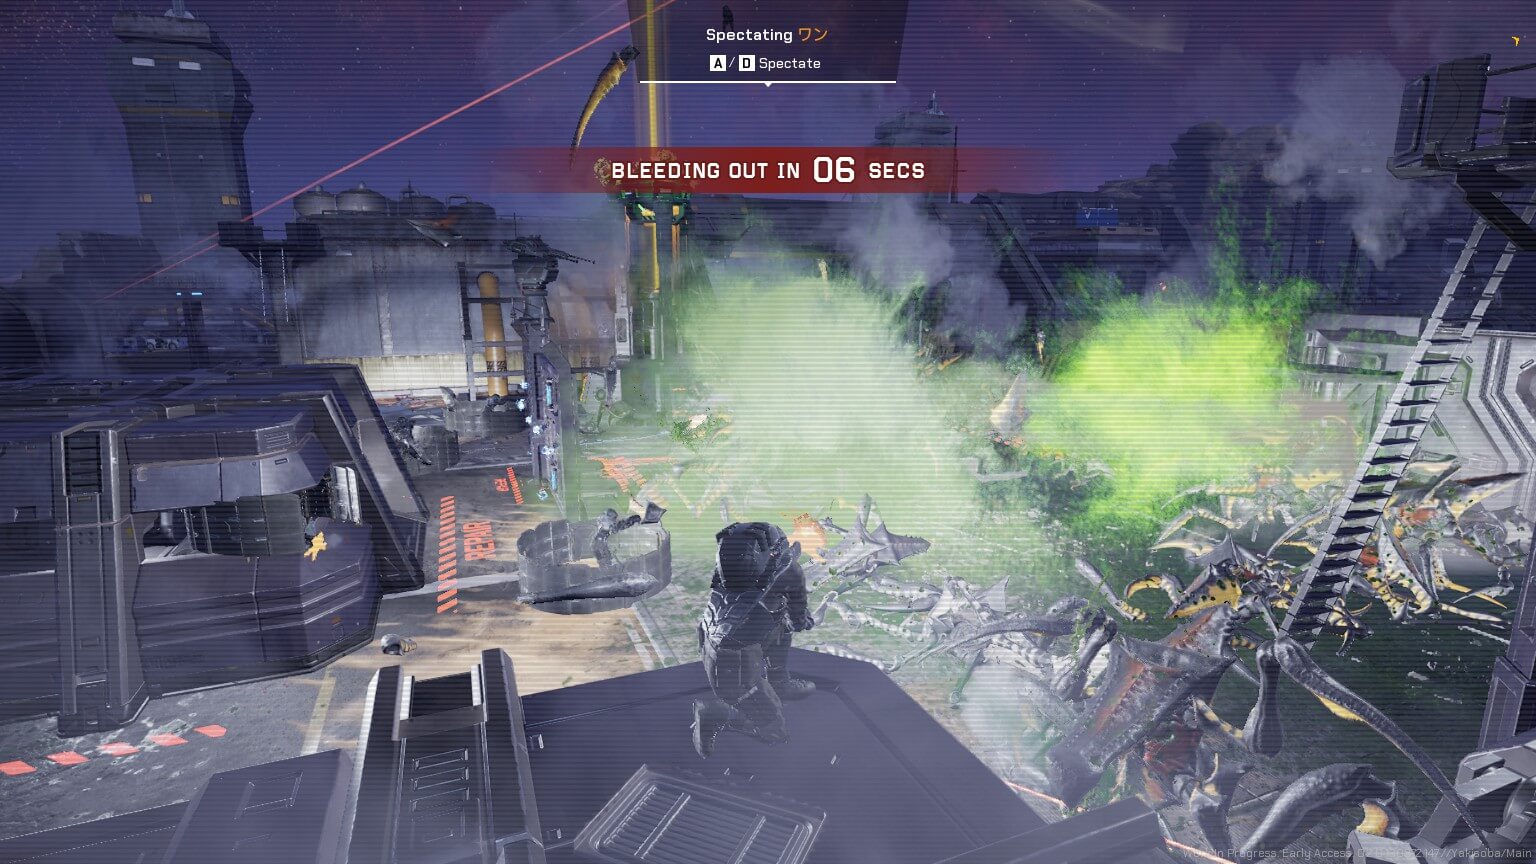 I am currently spectating a player who is surrounded by bugs. green blood particles and dust can be seen from dying arachnids and gunfire. several bodies are seen on the floor.